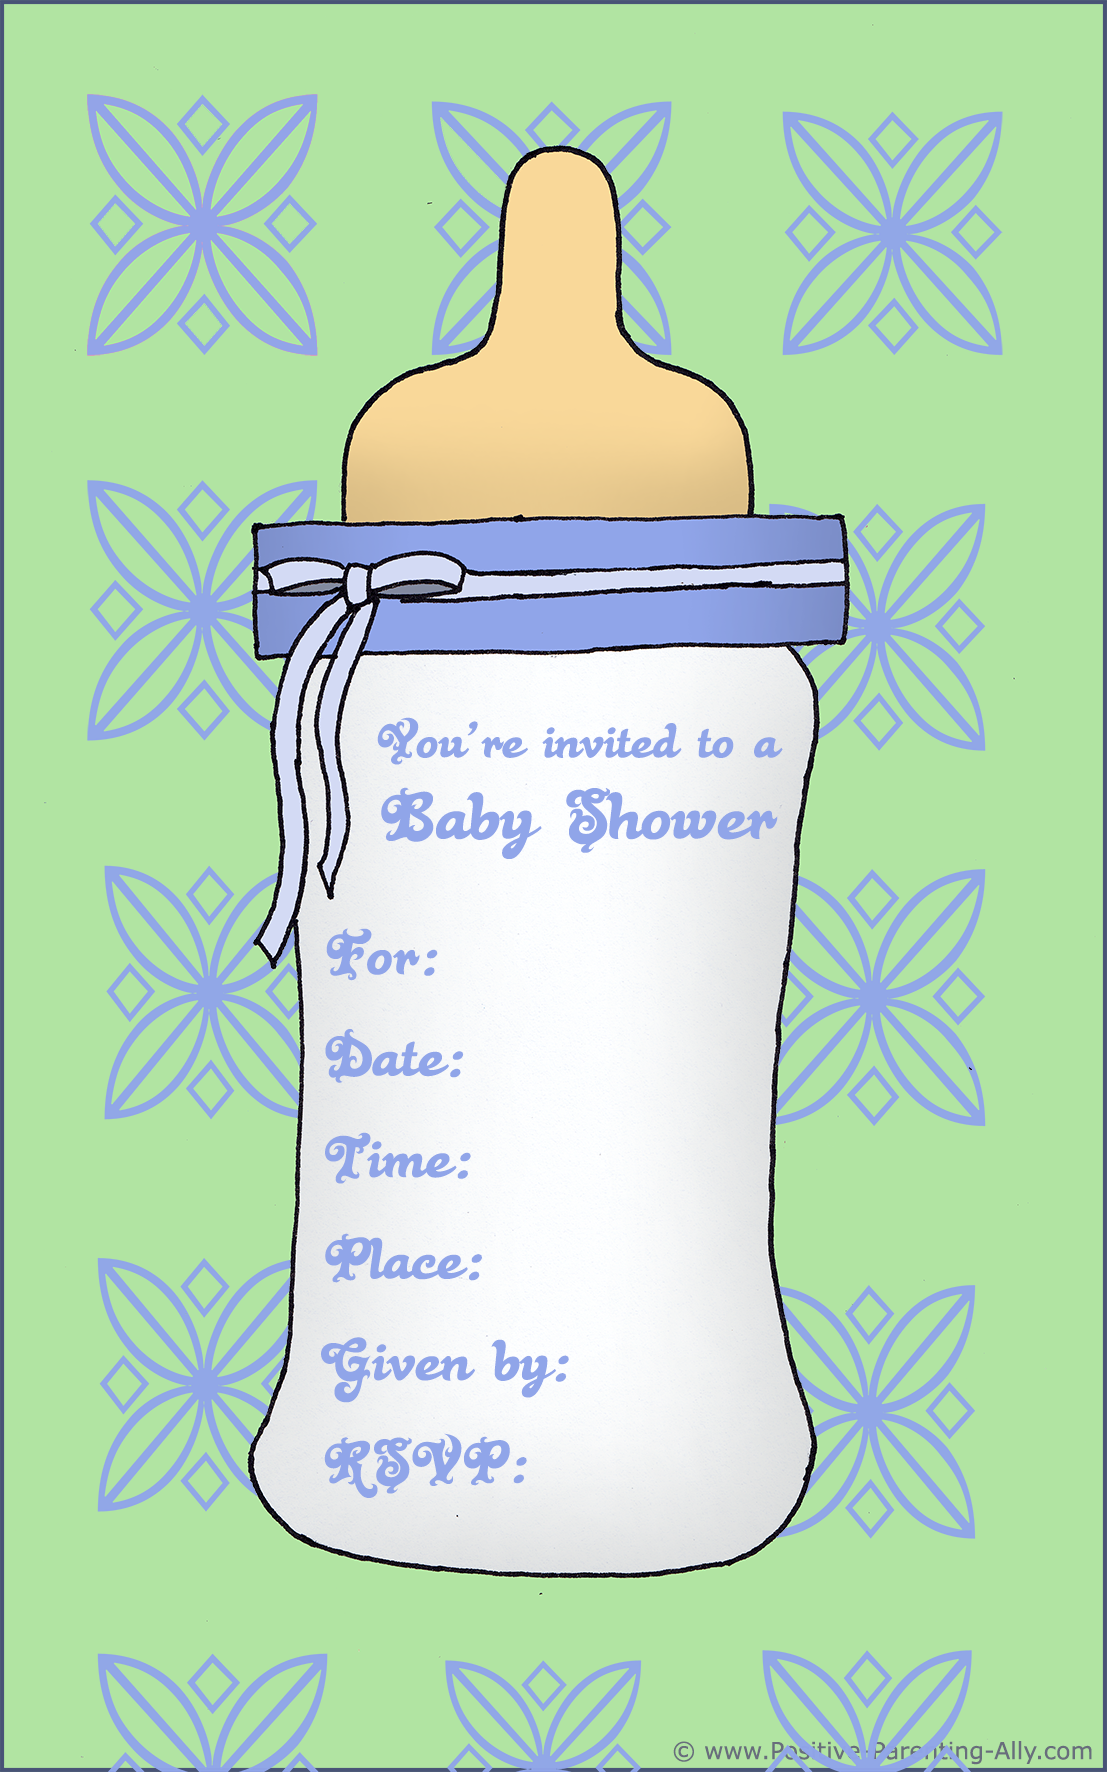 baby-shower-online-invitations-11-free-jungle-gold-baby-shower